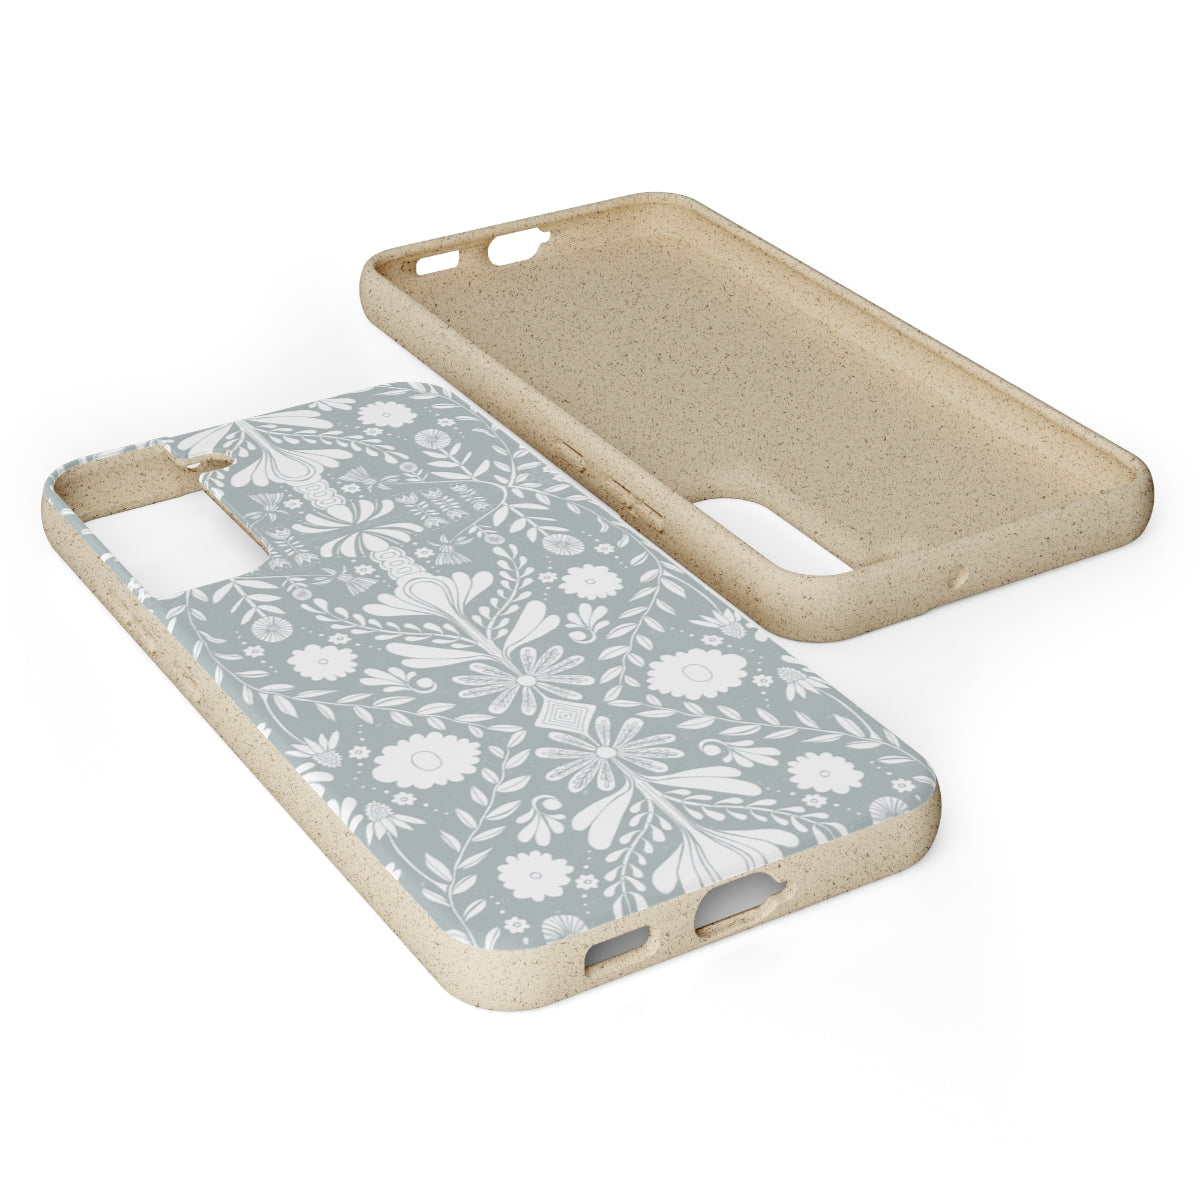 Biodegradable Cases [Air]